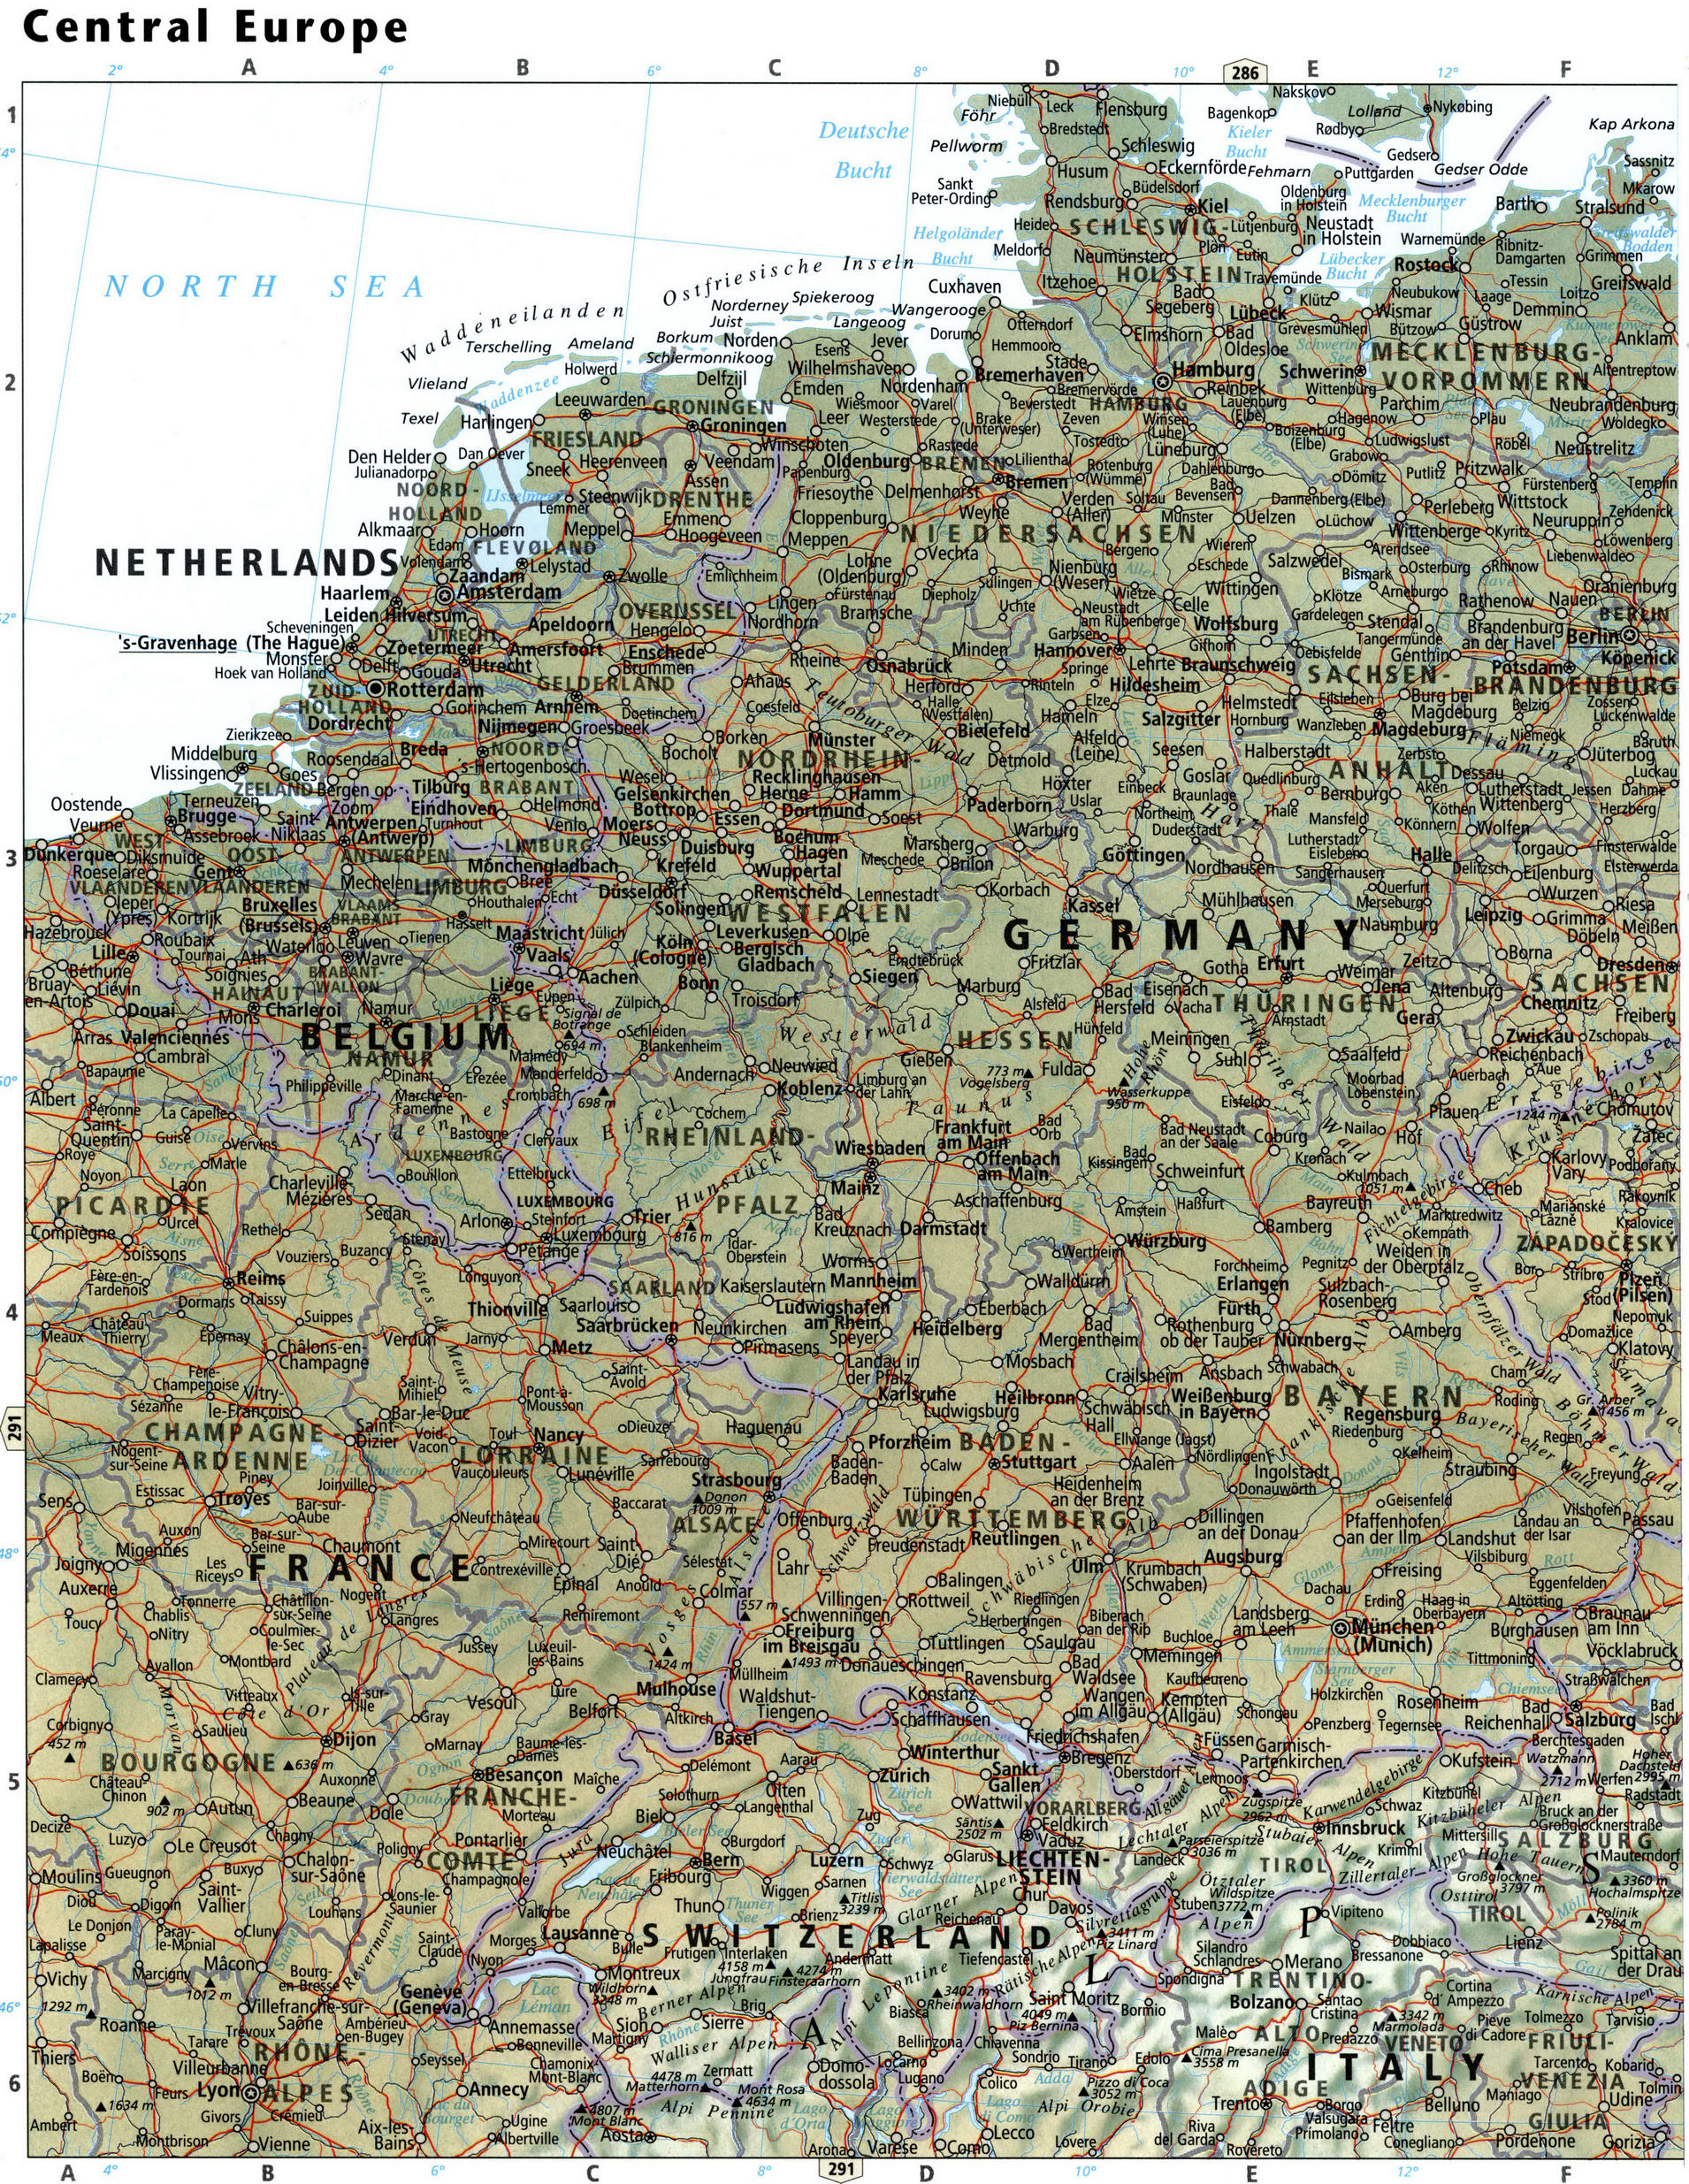 Central Europe map